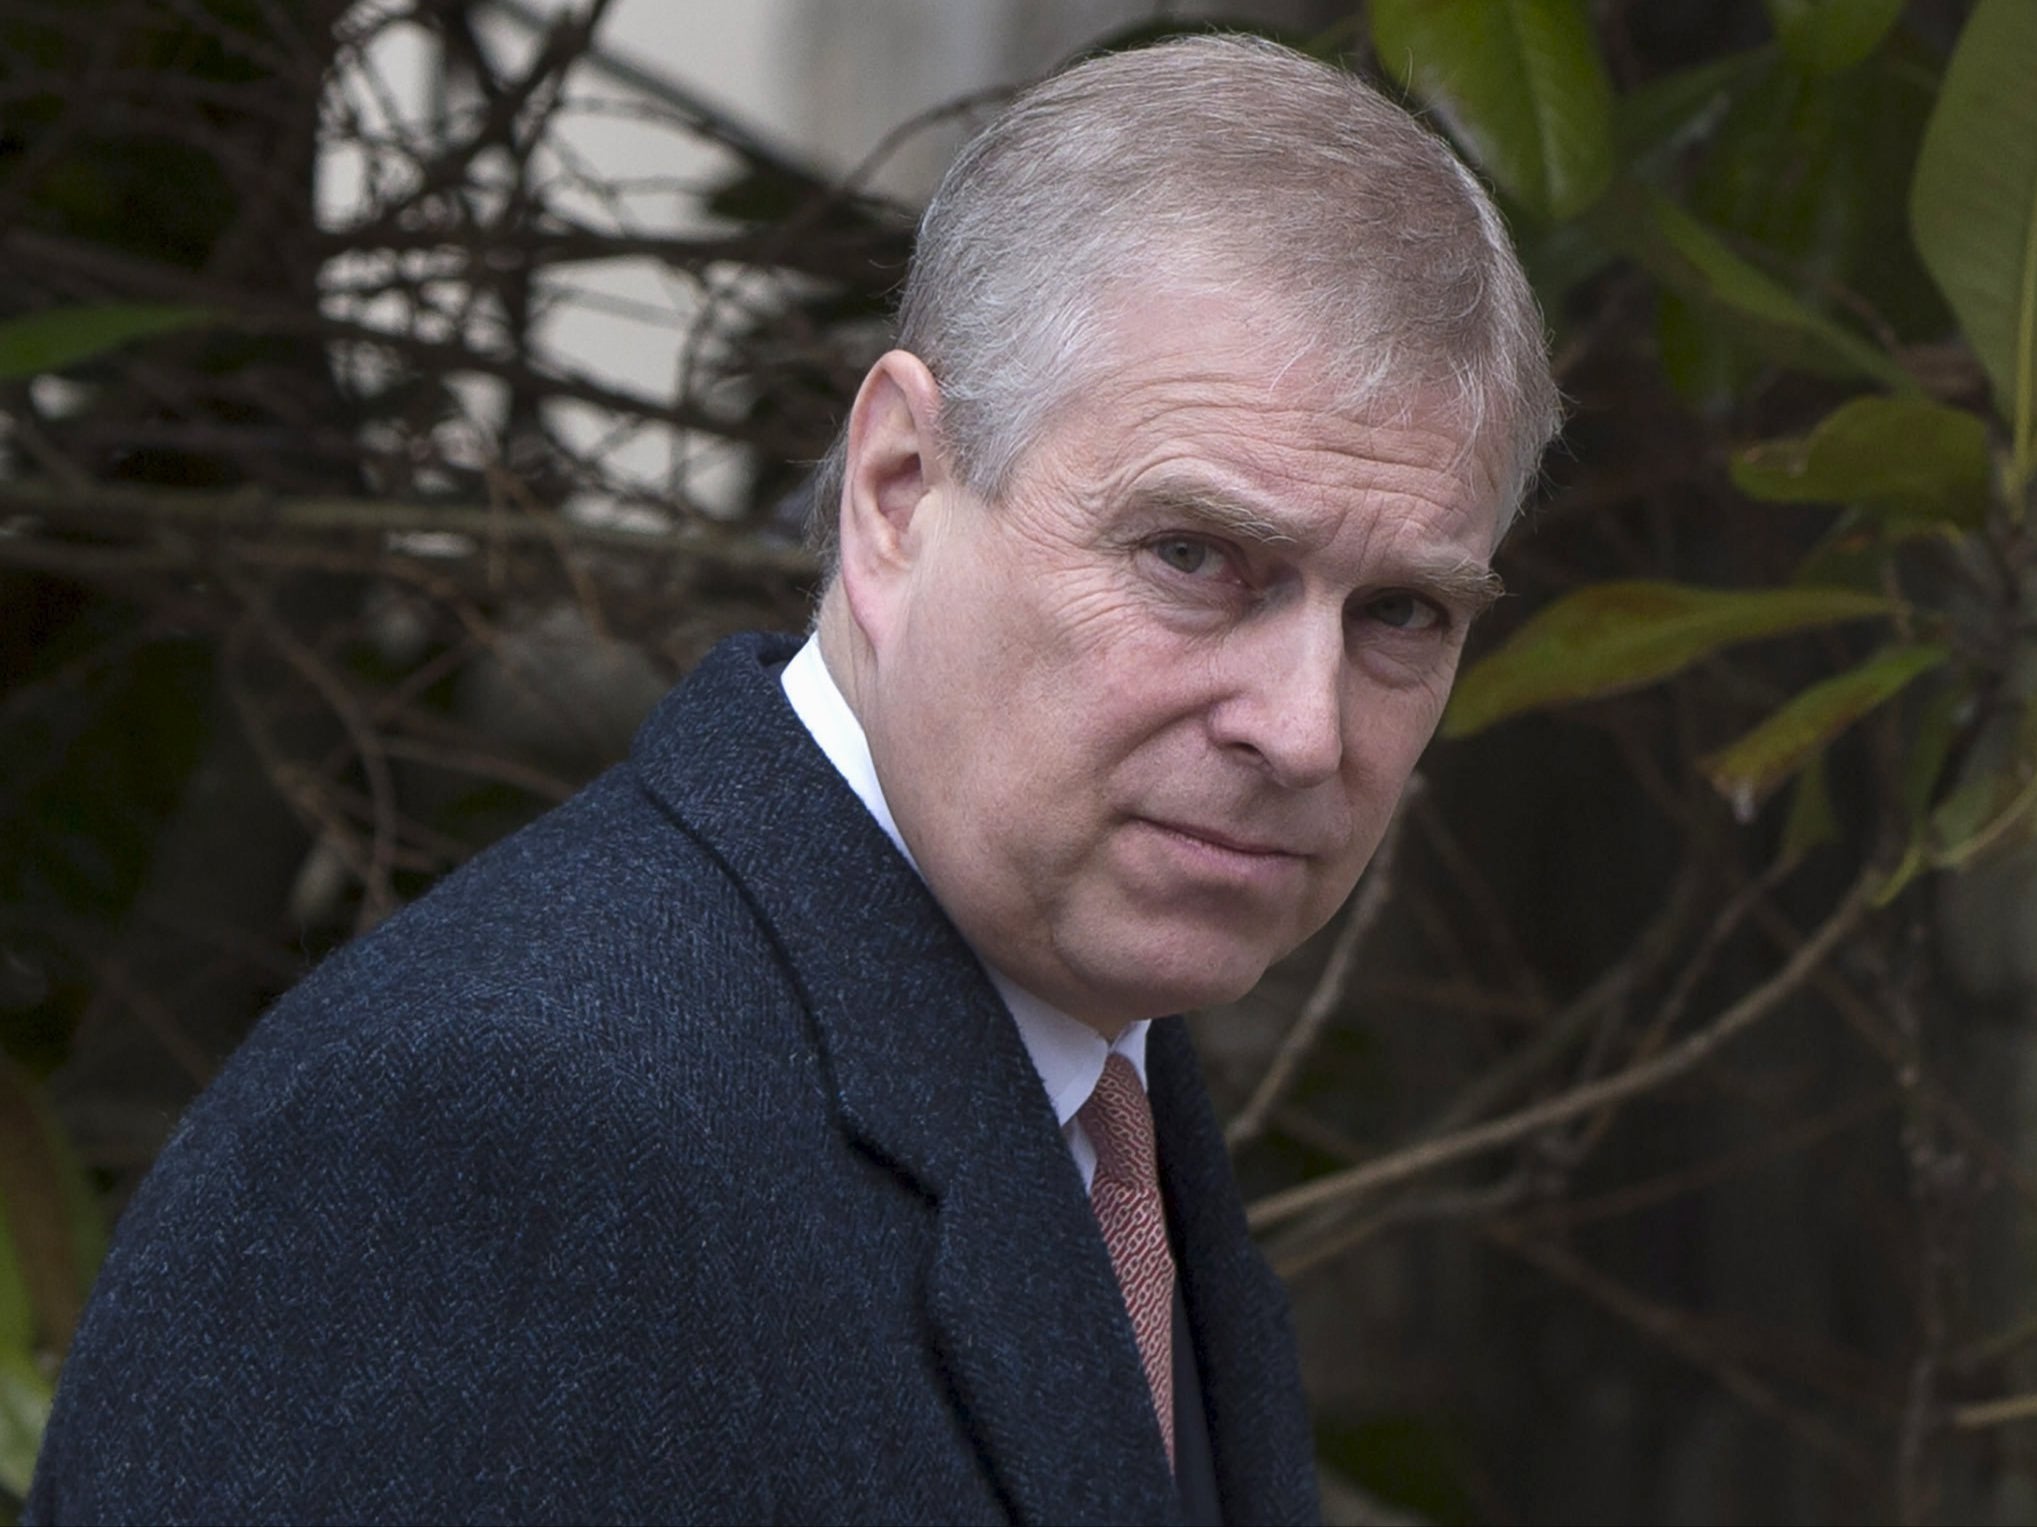 Prince Andrew’s connection with Jeffrey Epstein is set to come under further scrutiny